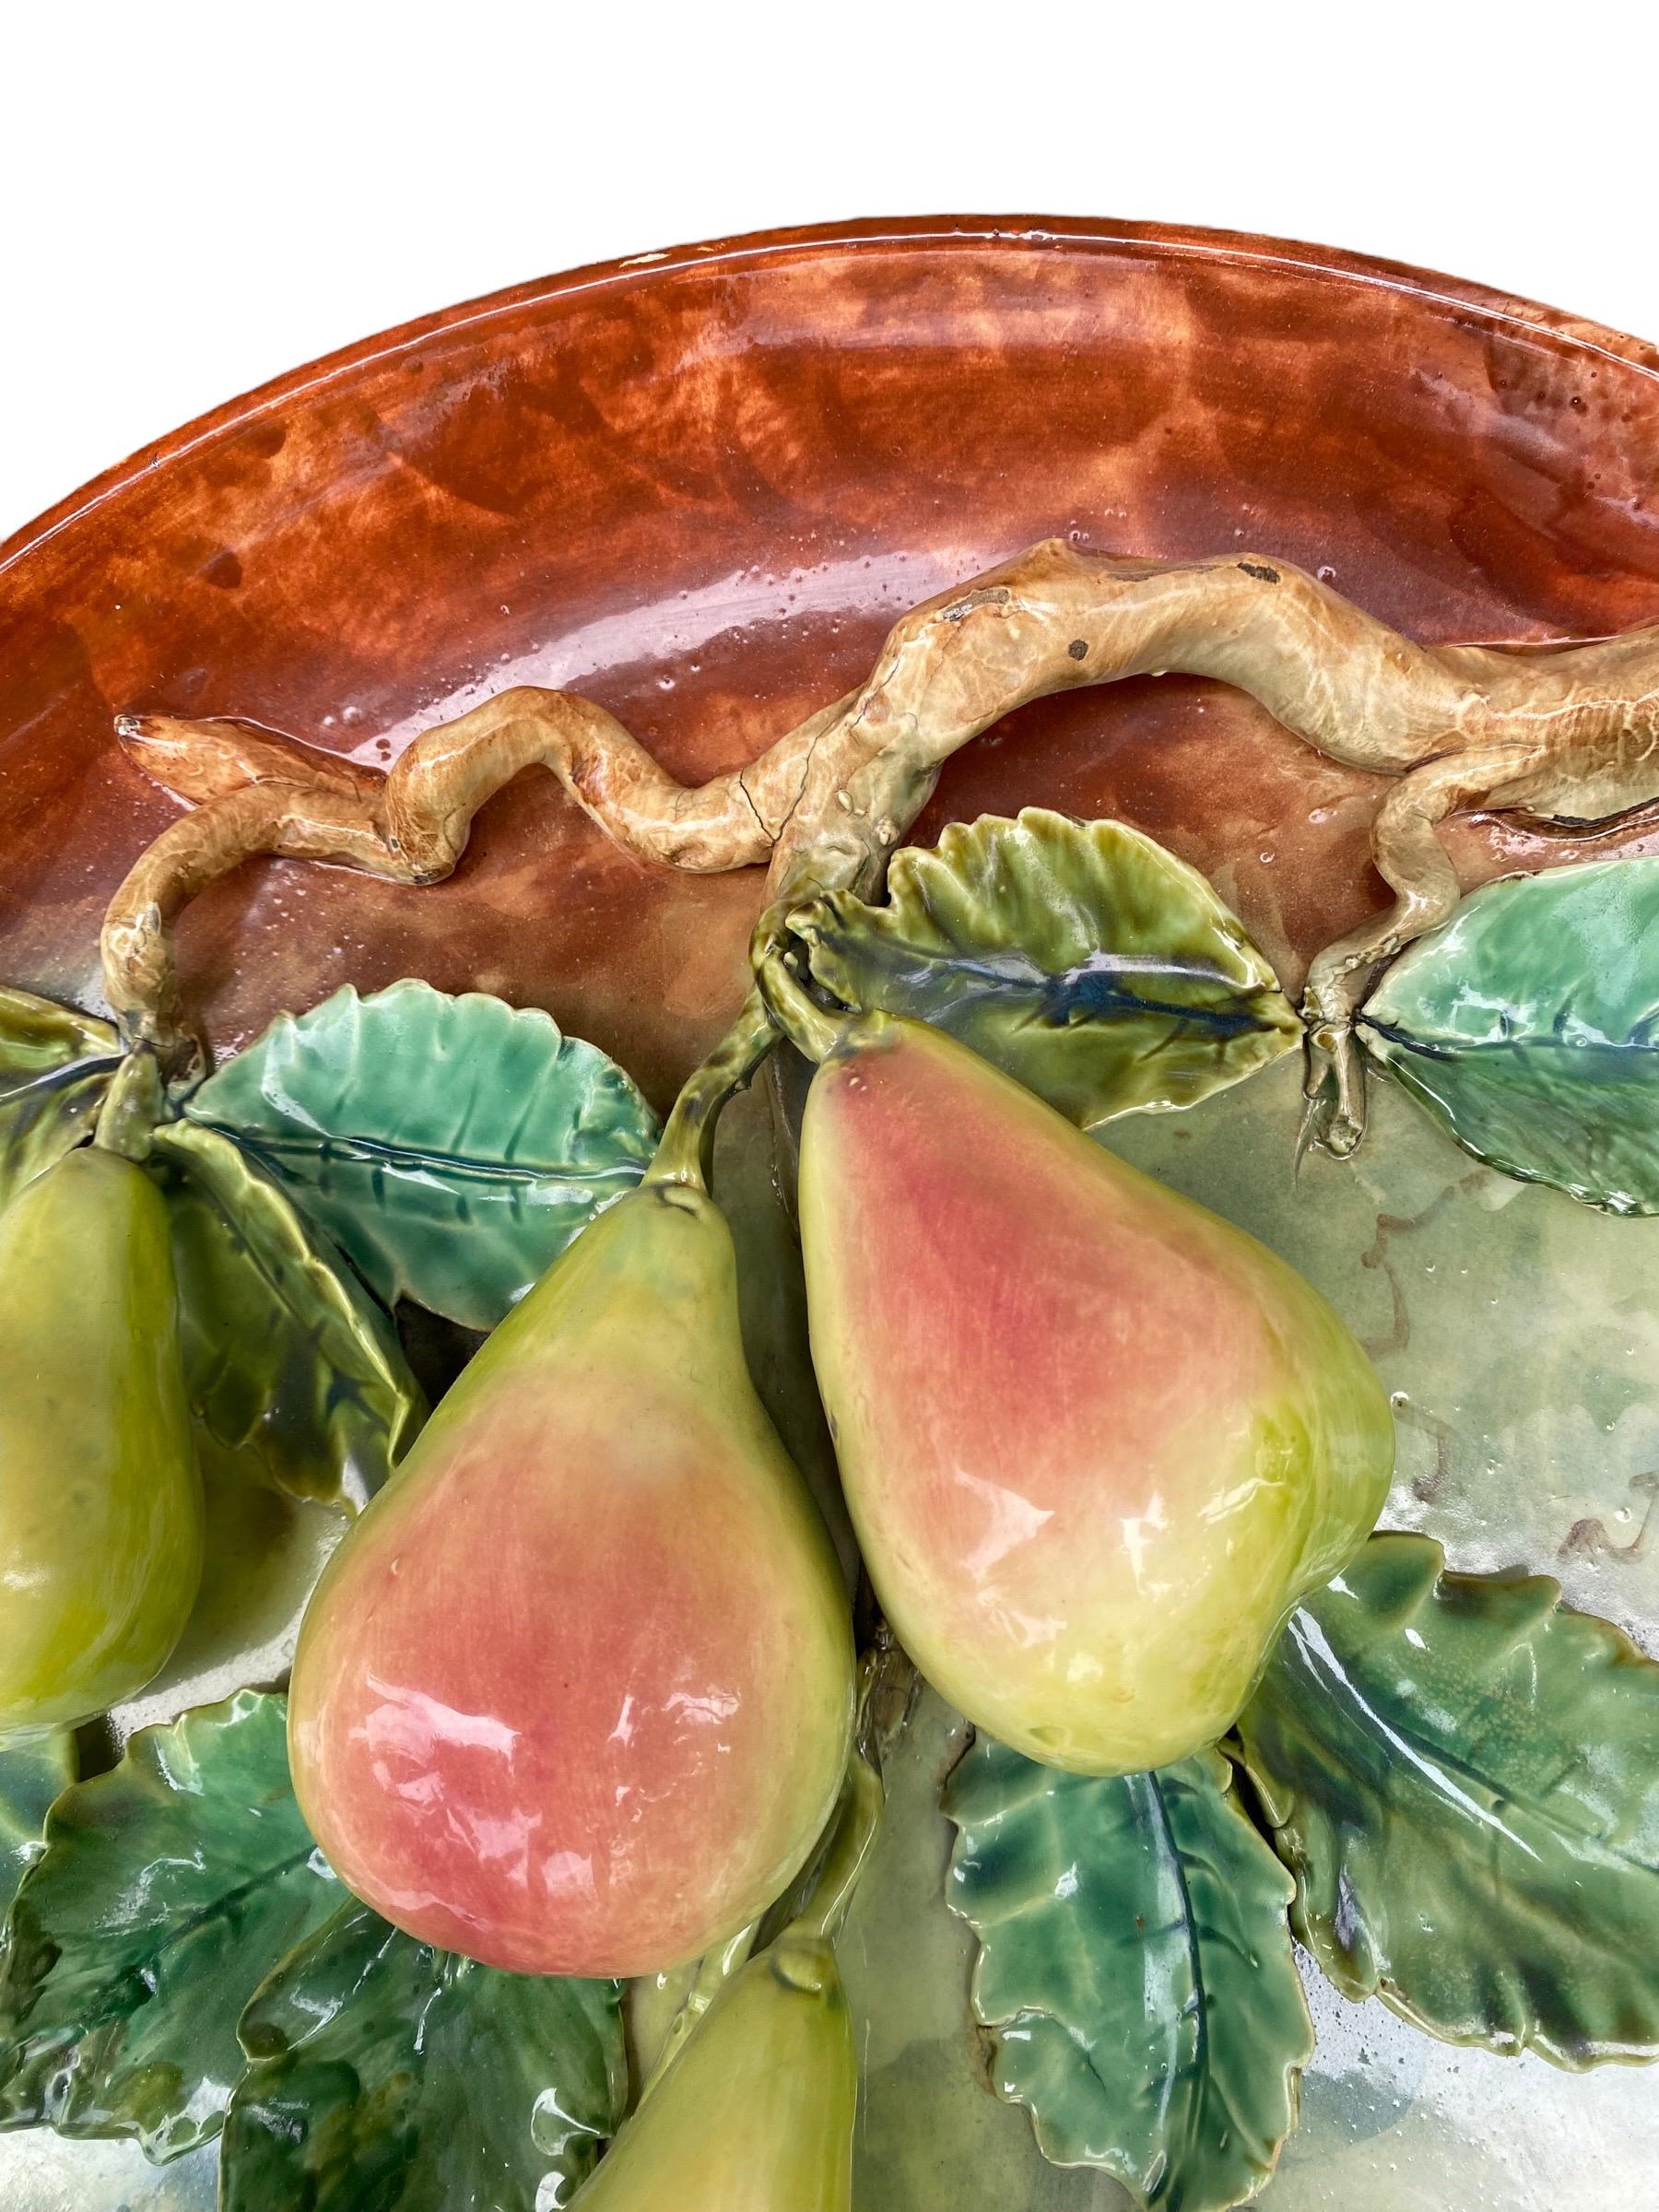 A stunning Large French majolica wall platter, late 19th century, with high relief decoration of colored pears dangling from a vine.

At the end of the 19th century, Longchamp and Fives-Lille produced fruits platters of all kinds in a range of